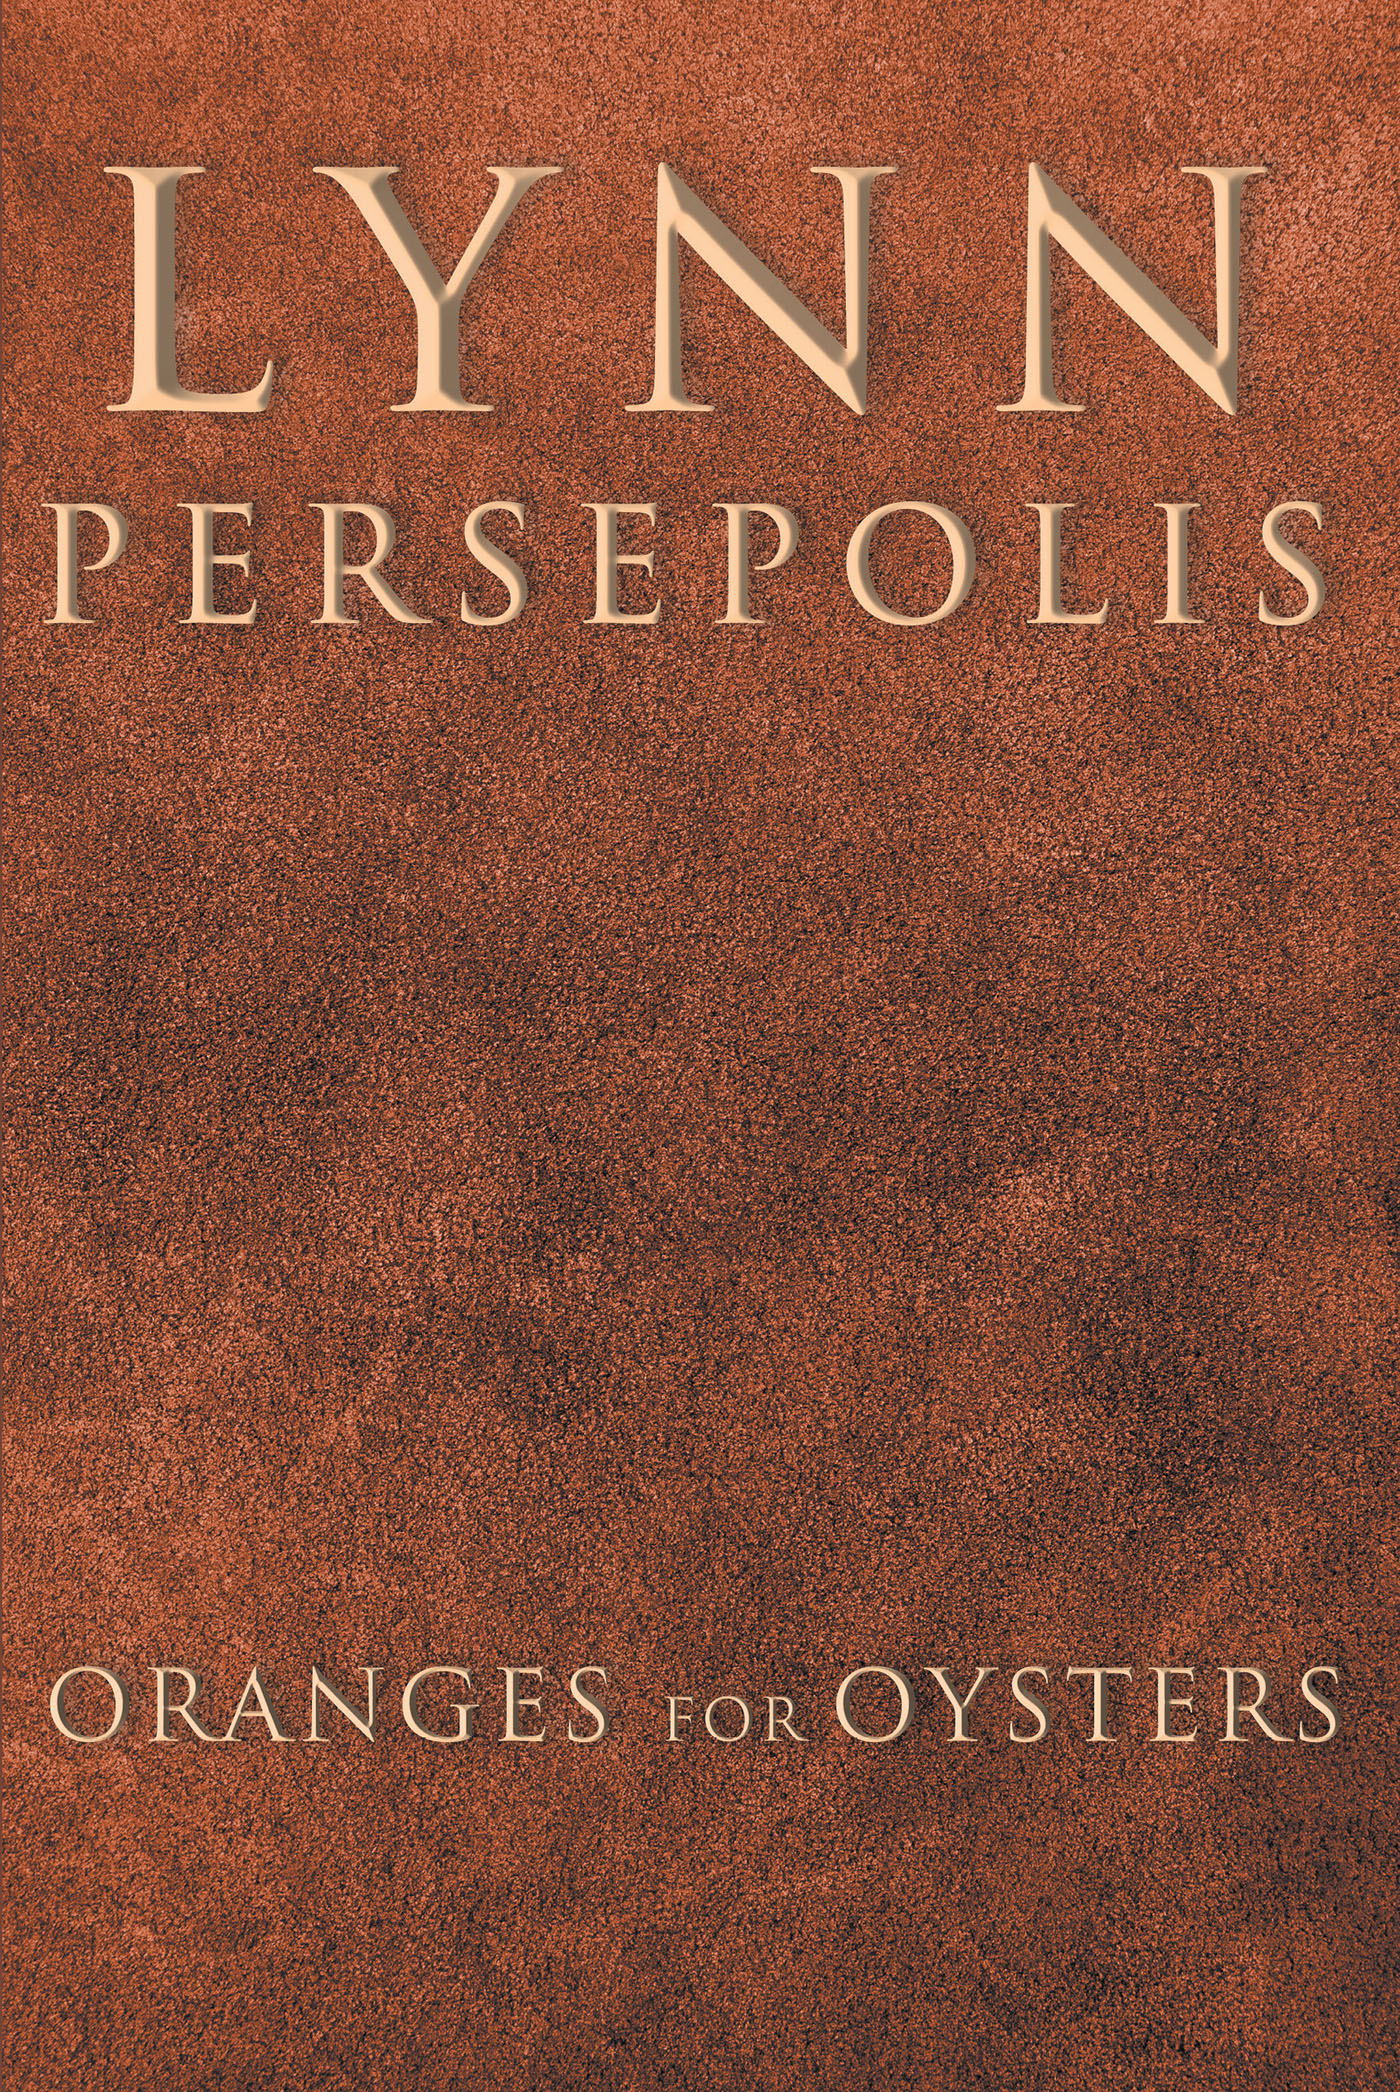 Lynn Persepolis’s Newly Released "Oranges for Oysters" is an Evocative Collection of Thought-Provoking Poetic Works